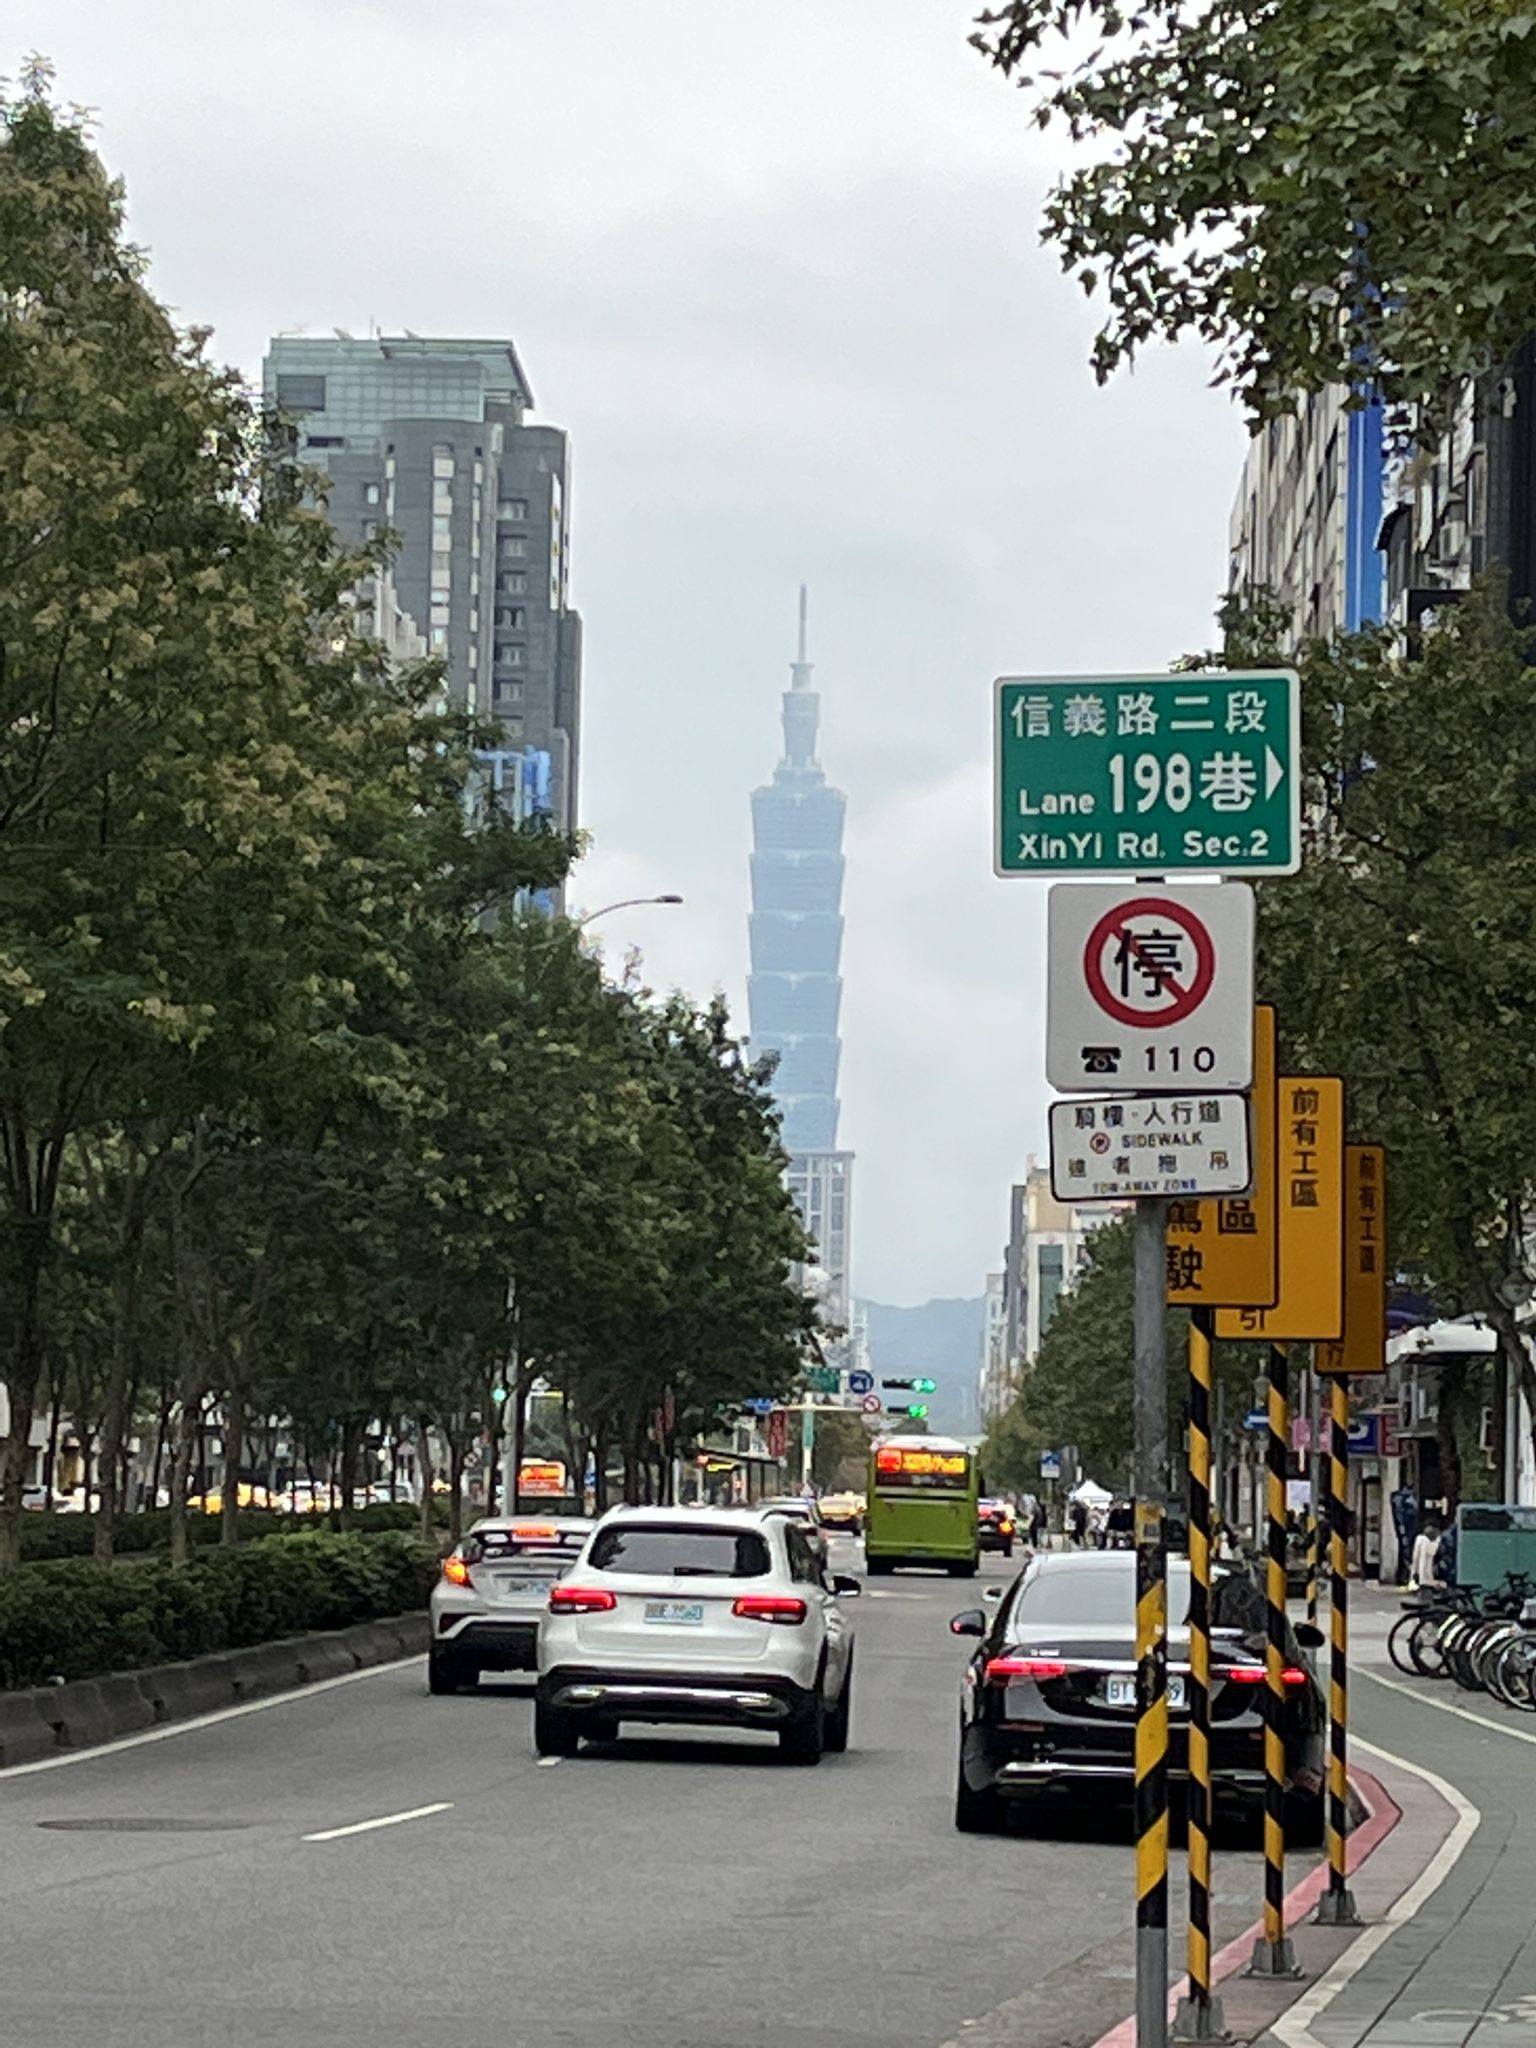 Visit the Taipei 101 Skyscraper with a 15-hour layover in Taipei